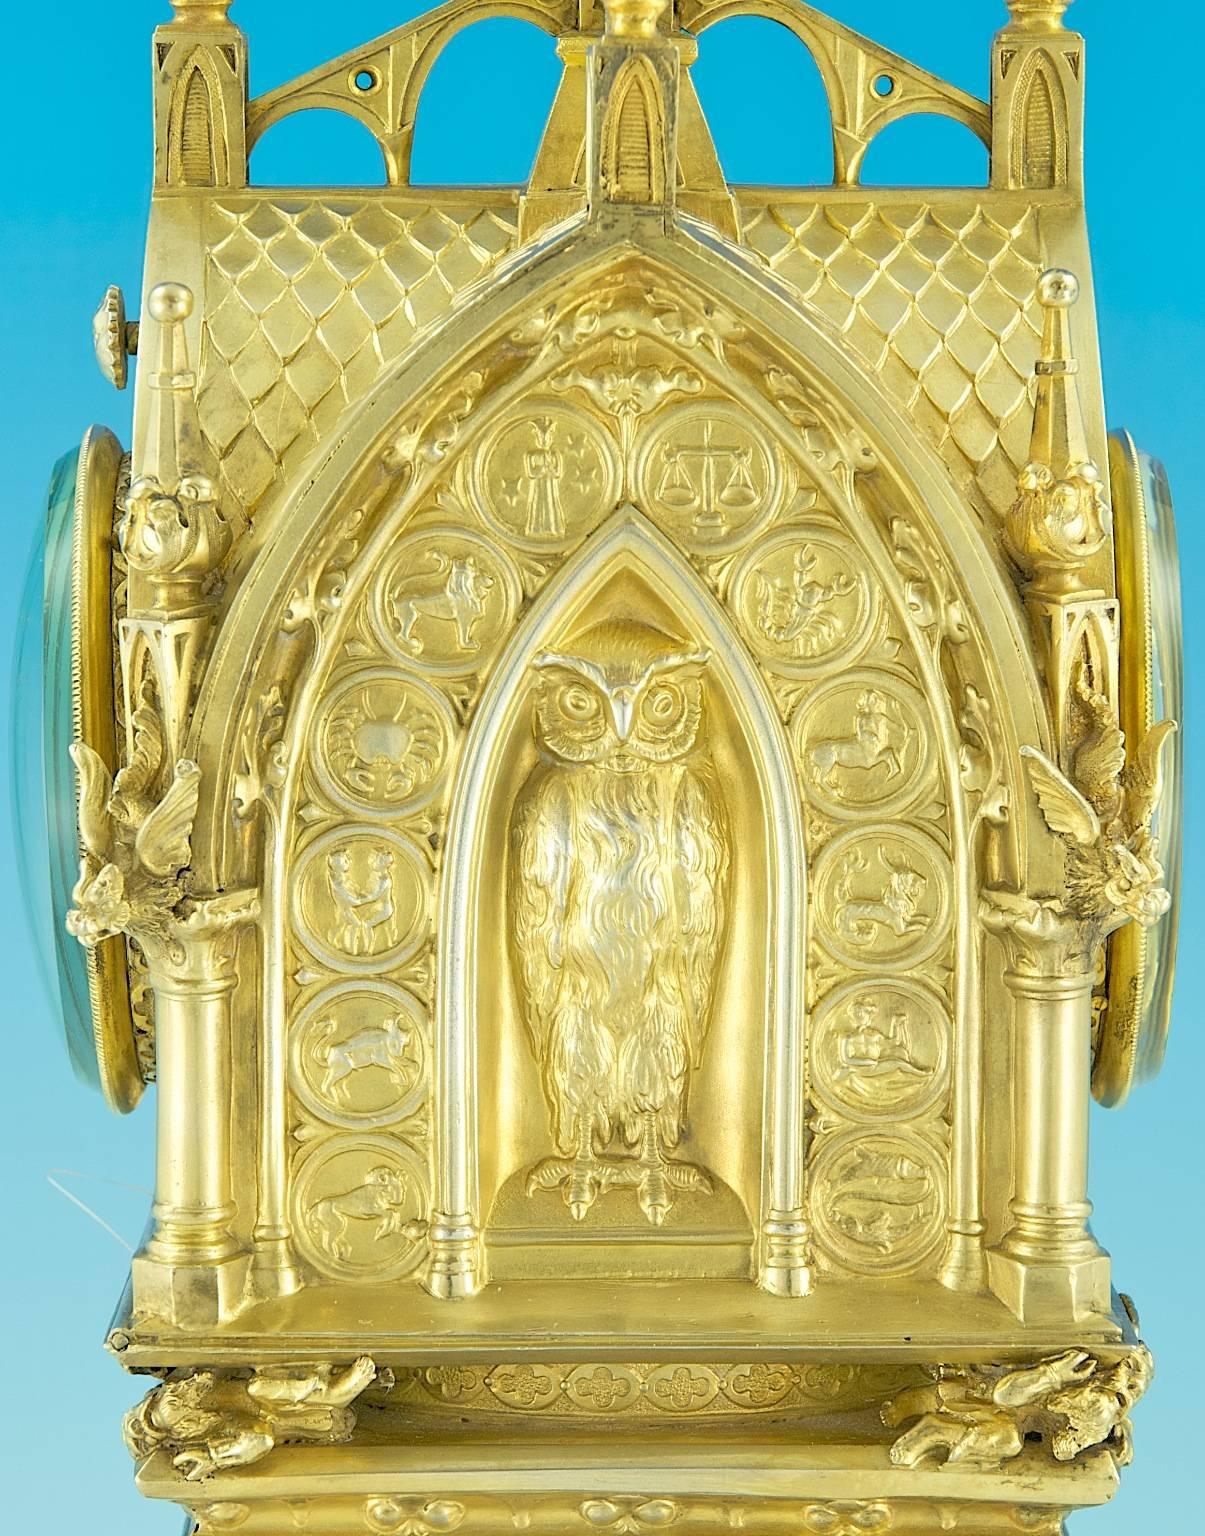 19th Century Tiffany & Co a Magnificent Gothic Revival Mantle Clock For Sale